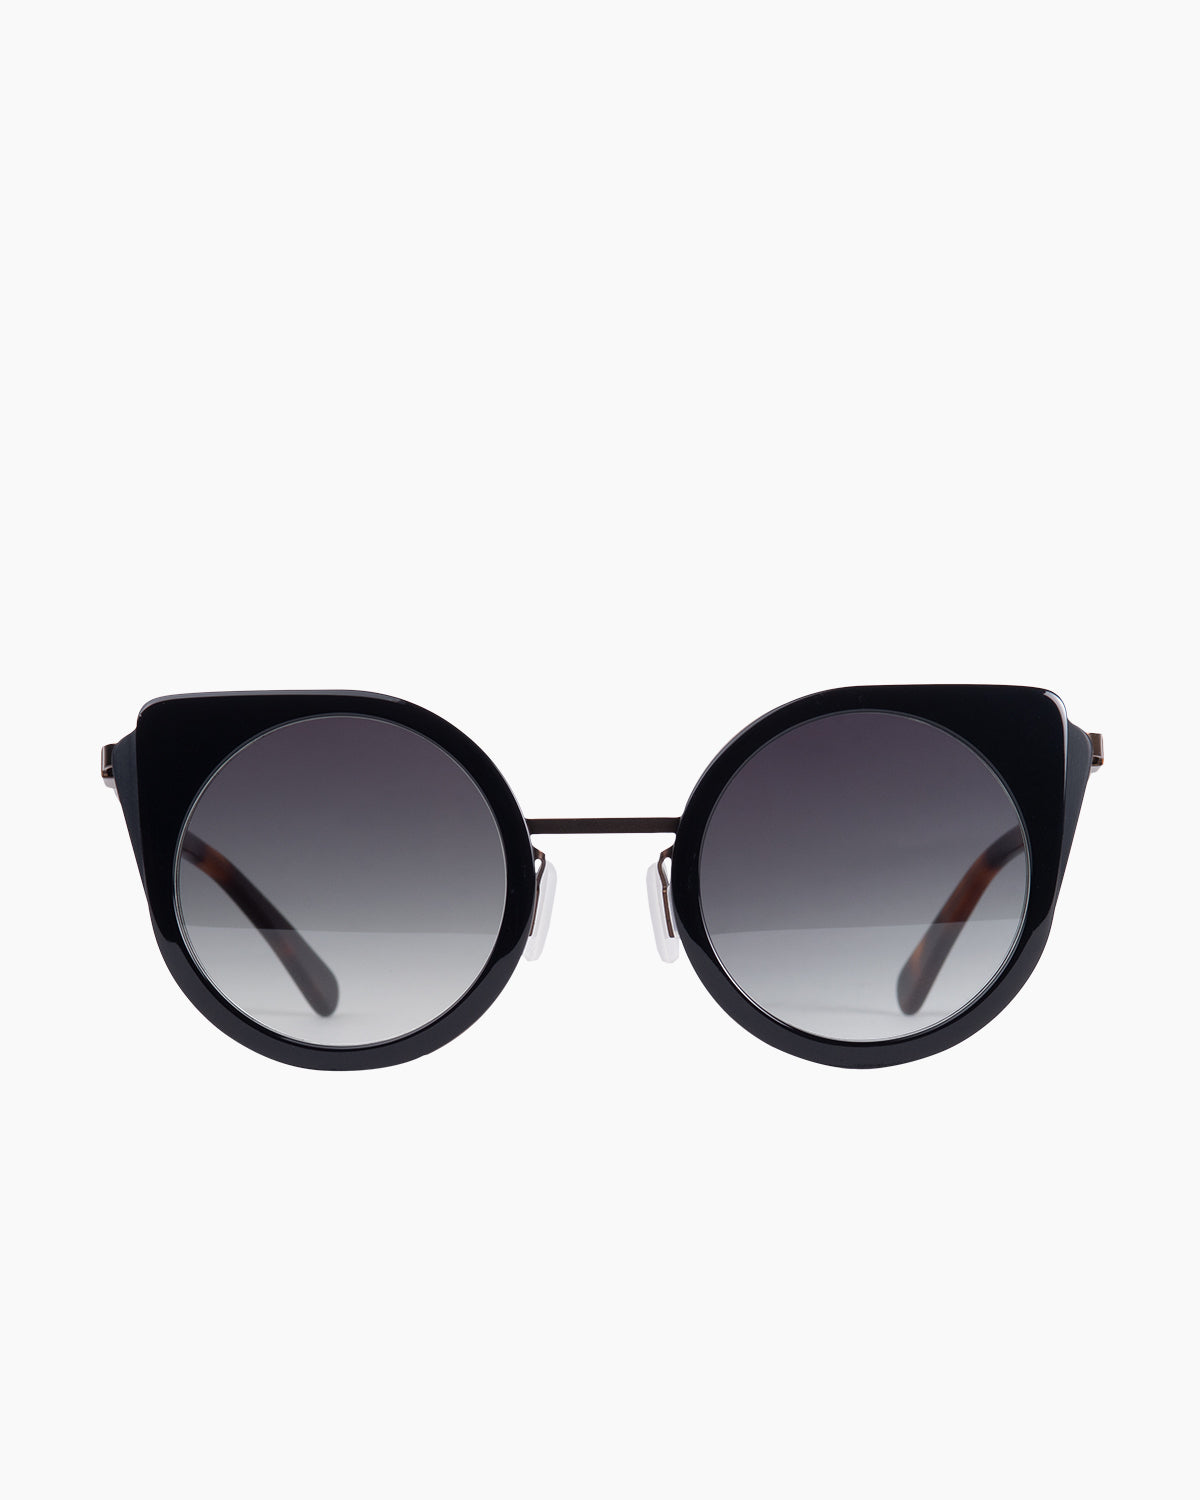 Gamine - CatS - Black/Copper | glasses bar:  Marie-Sophie Dion